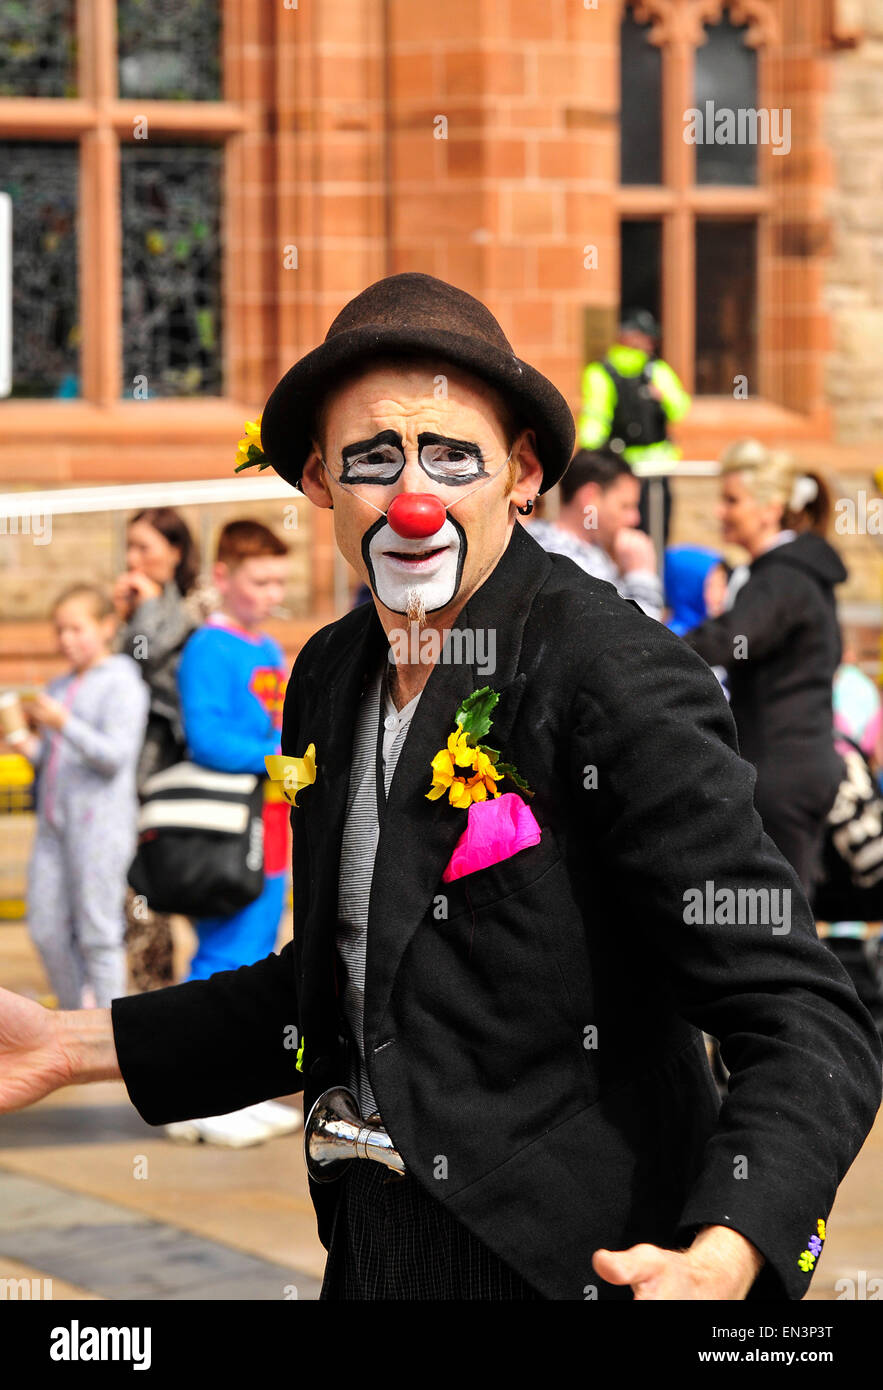 Clown with painted face and red nose wearing a hat in the Guildhall Square, Derry, Londonderry, Northern Ireland. Stock Photo